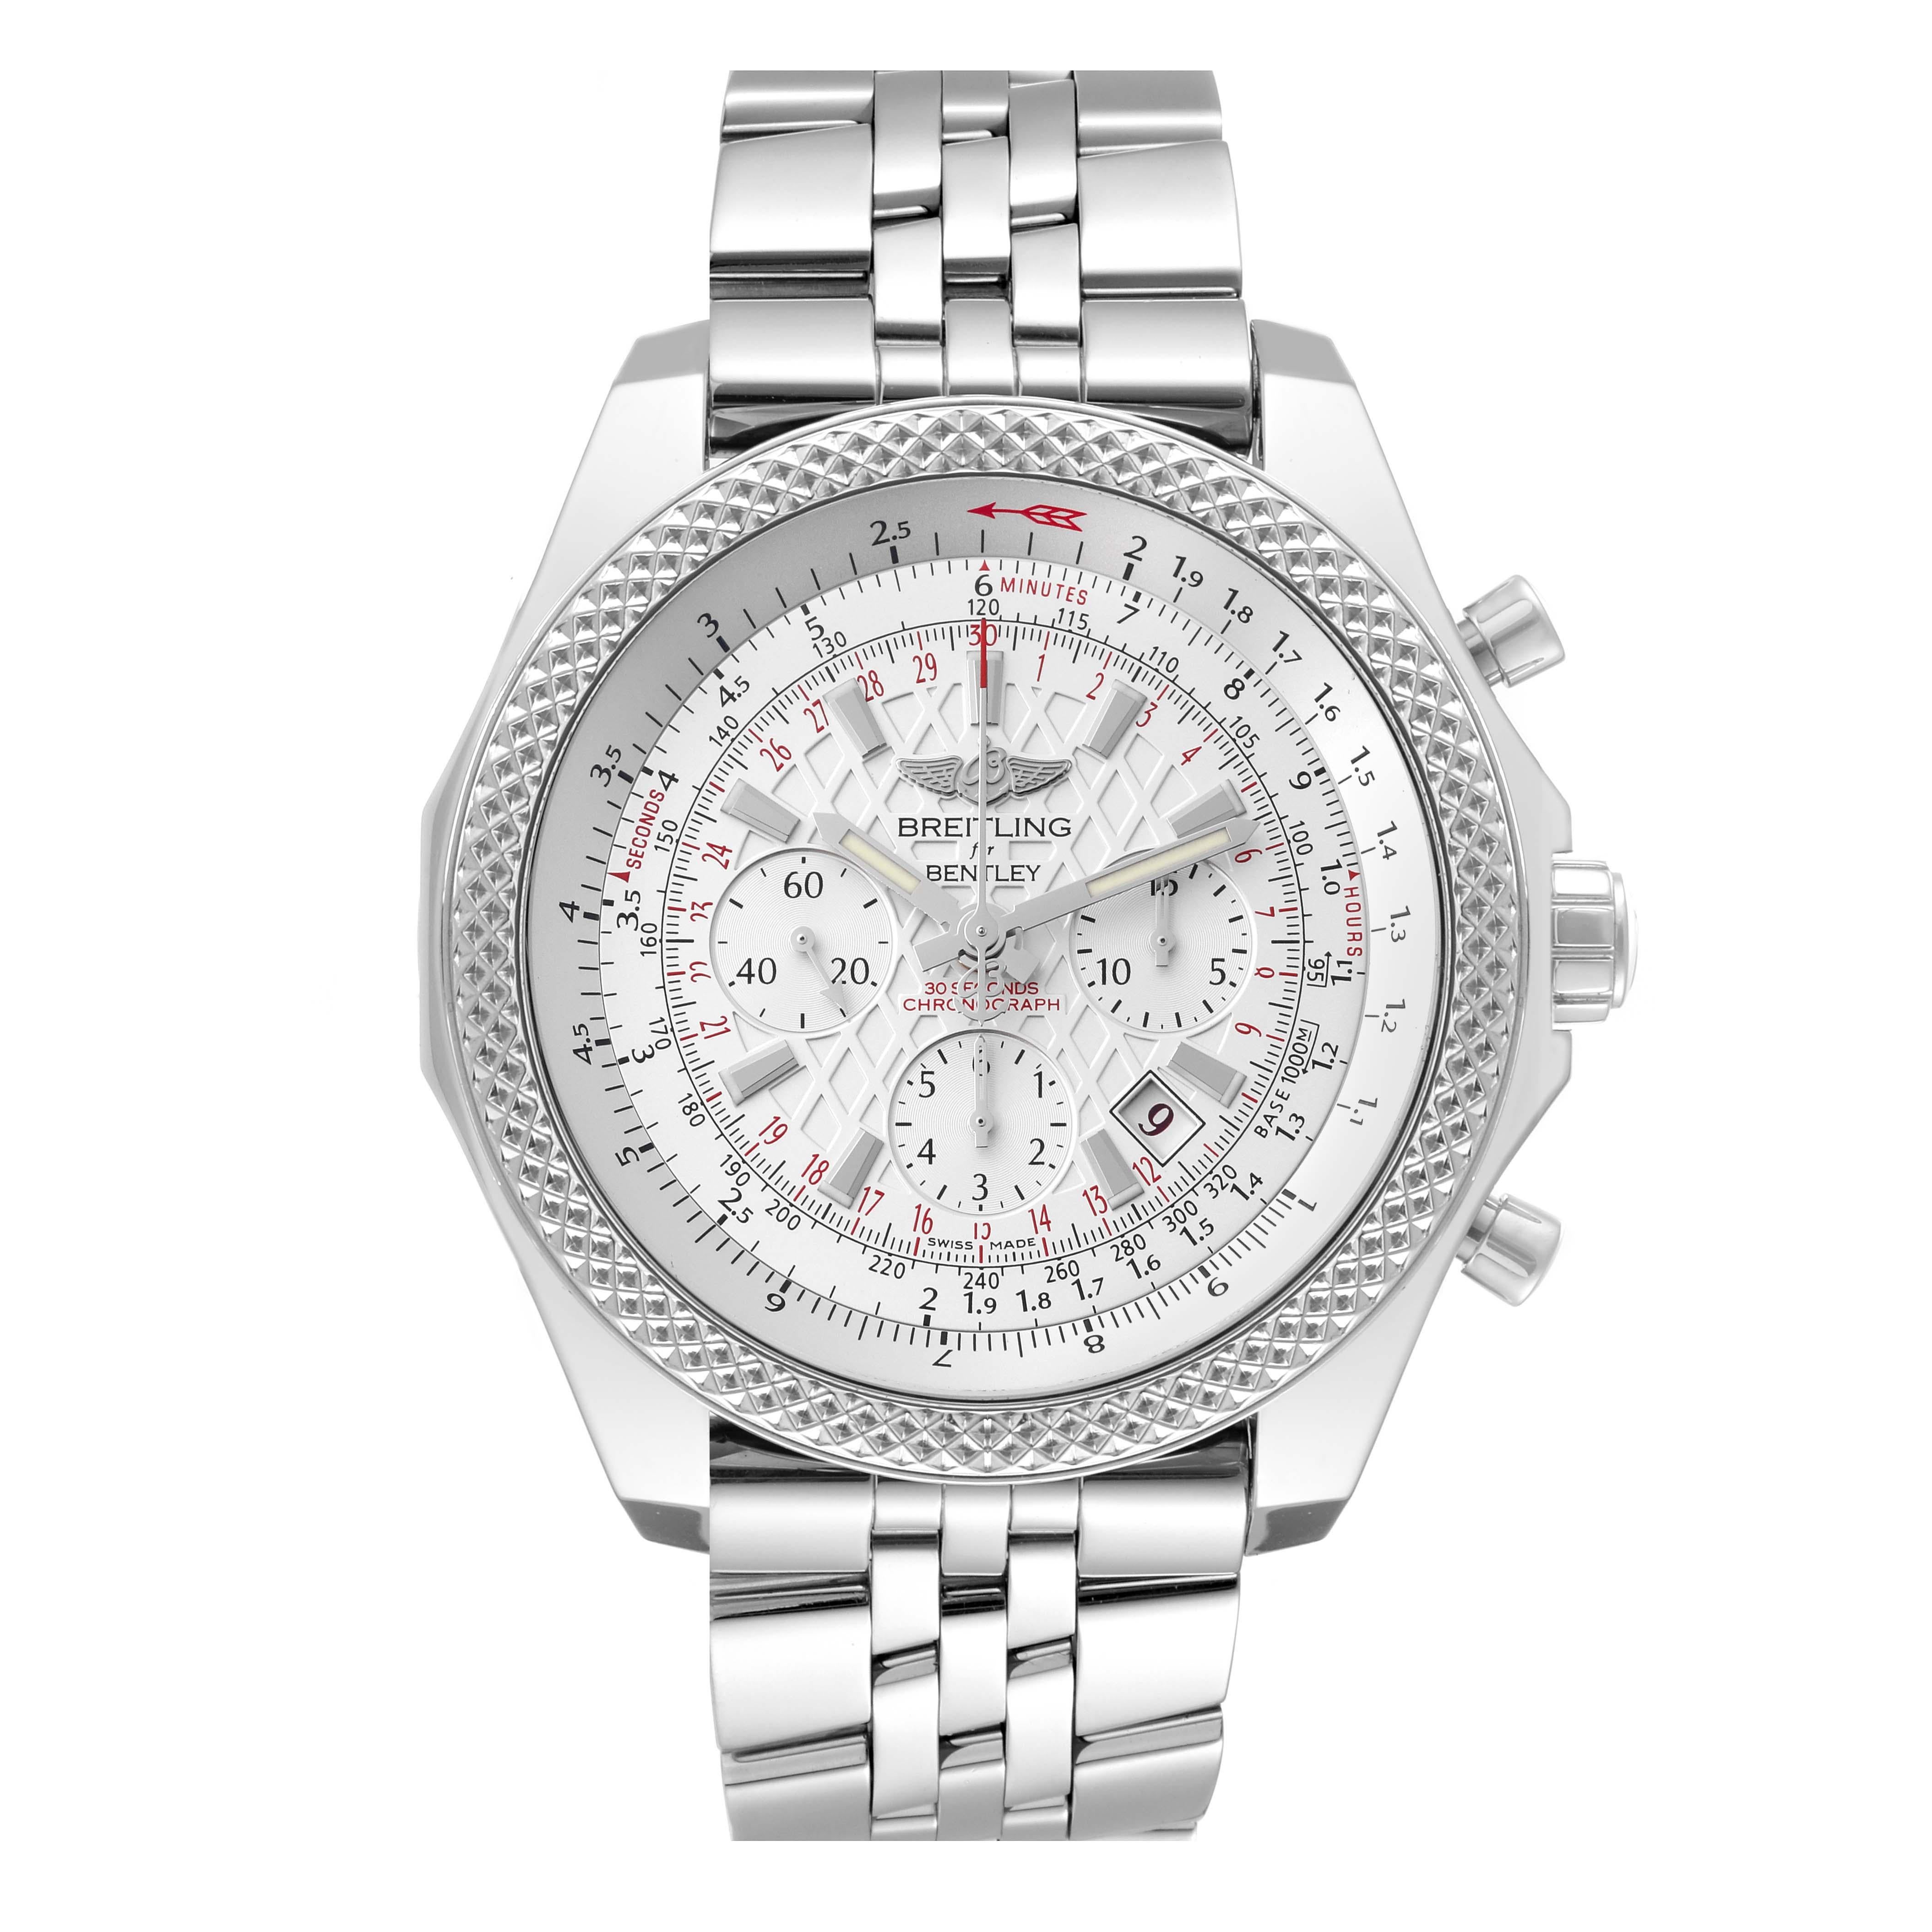 Breitling Bentley B06 Silver Dial Steel Mens Watch AB0611 Box Card. Self-winding automatic officially certified chronometer movement. Chronograph function. Stainless steel case 49 mm in diameter. Stainless steel screwed-down crown and pushers.